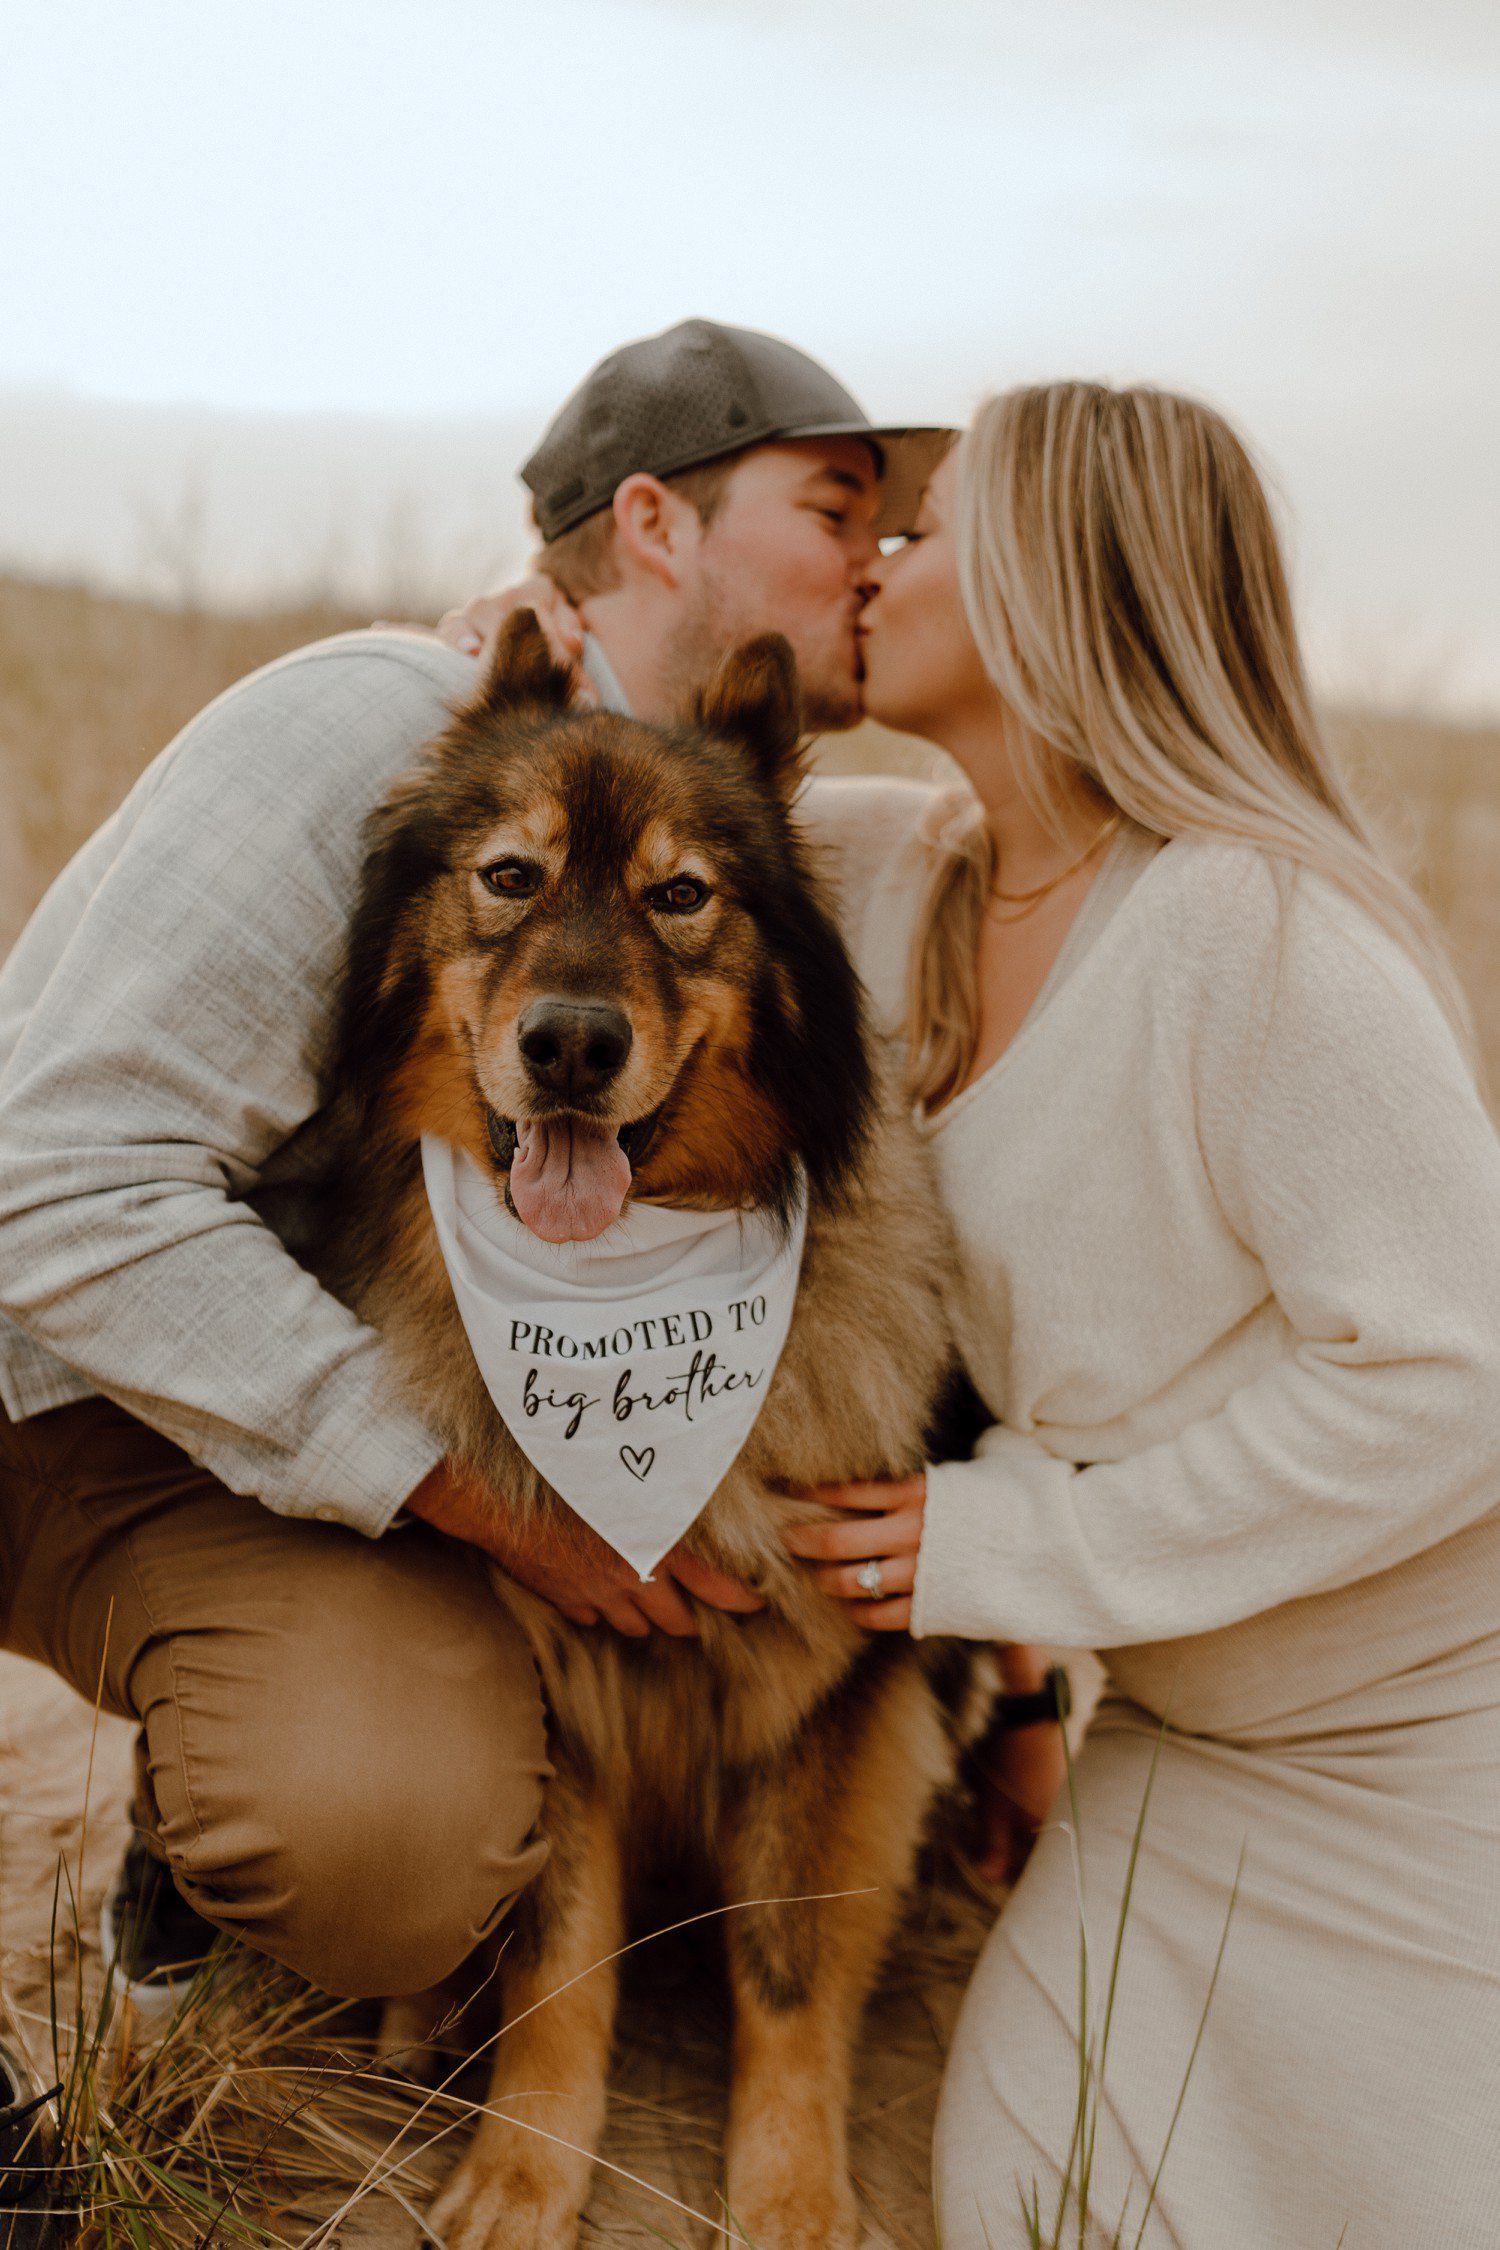 Grand Haven Beach Pregnancy Announcement photos with dog